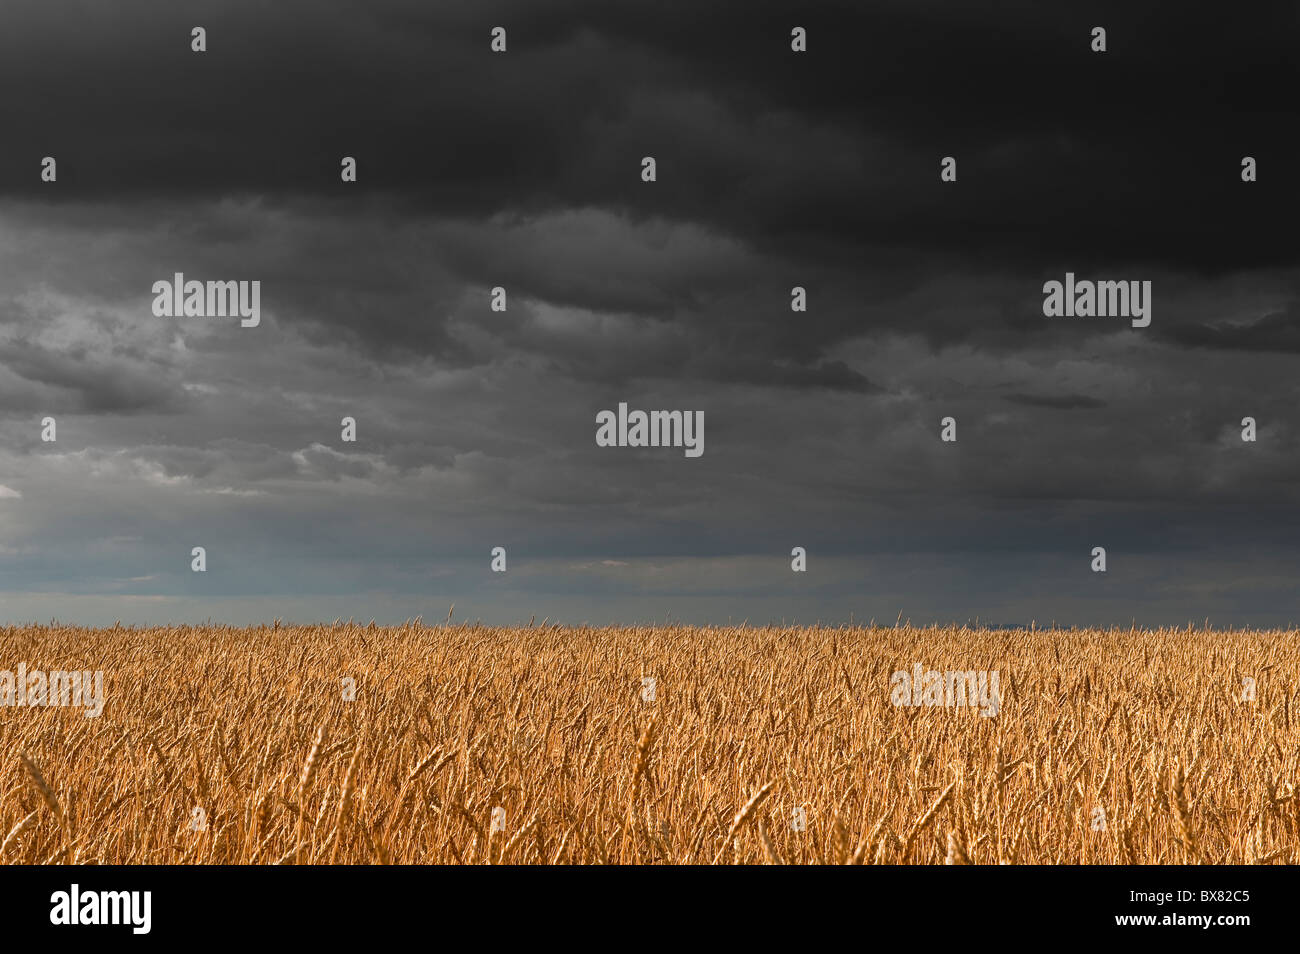 A beautiful isolated English wheat field lit by patches of sunlight with dark stormy skies overhead Stock Photo